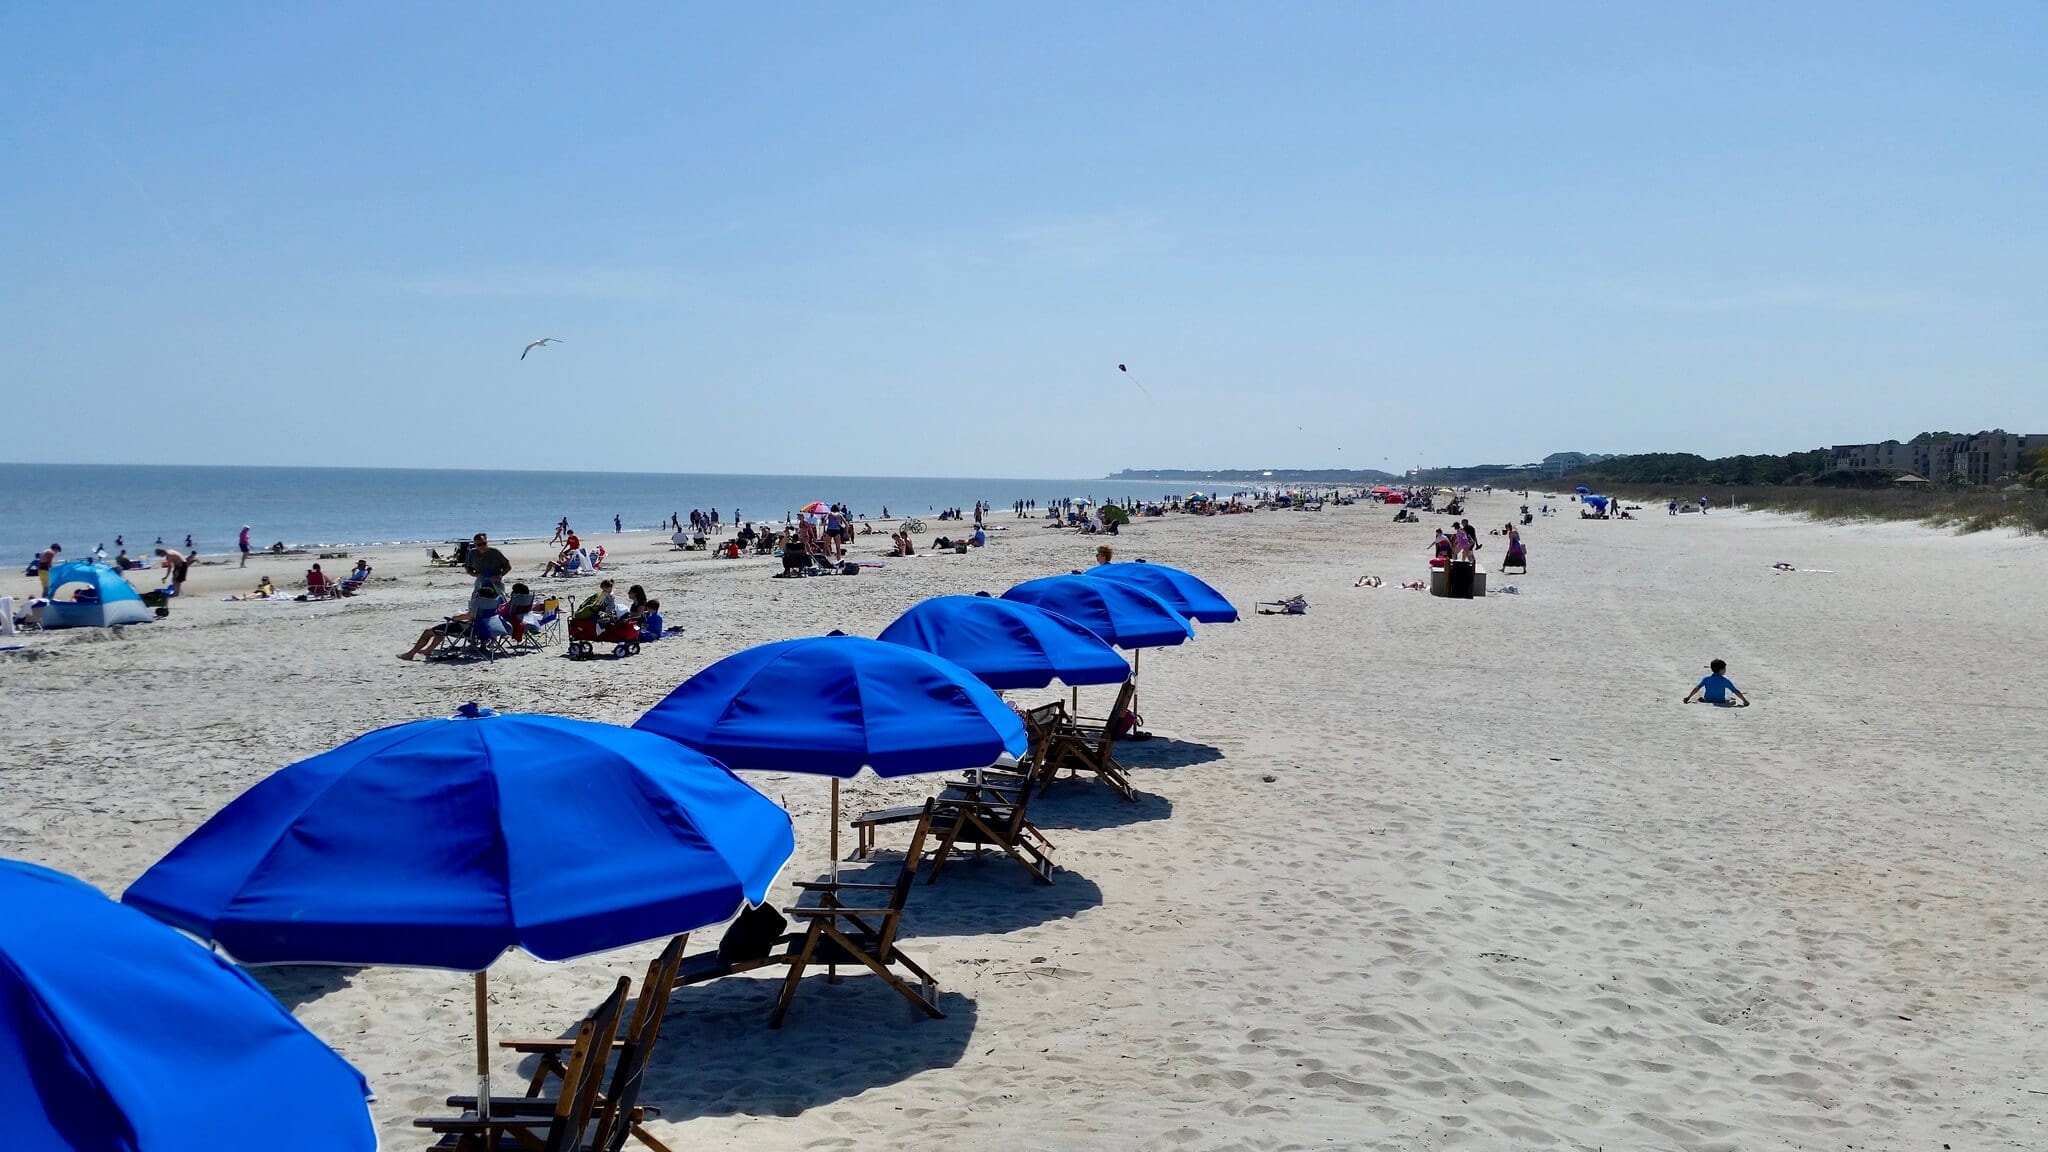 Beach with blue umbrellas and people